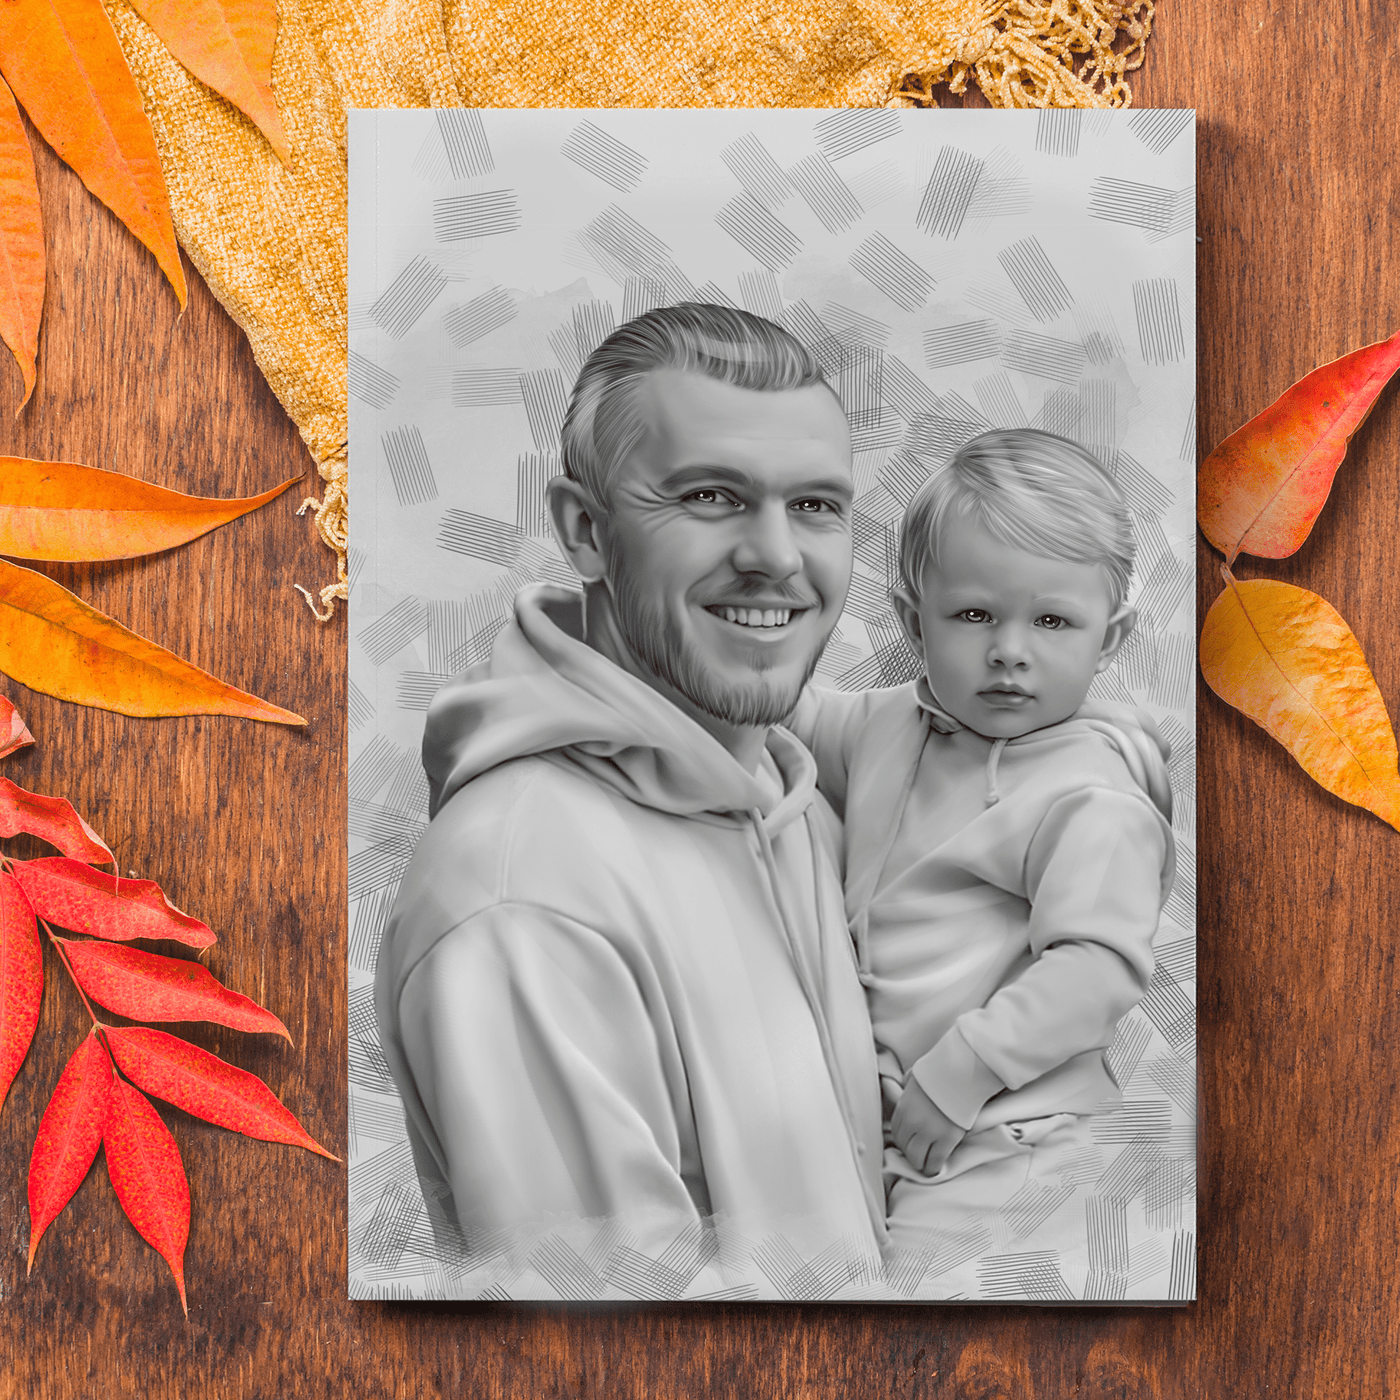 Custom Pencil Drawing for Father